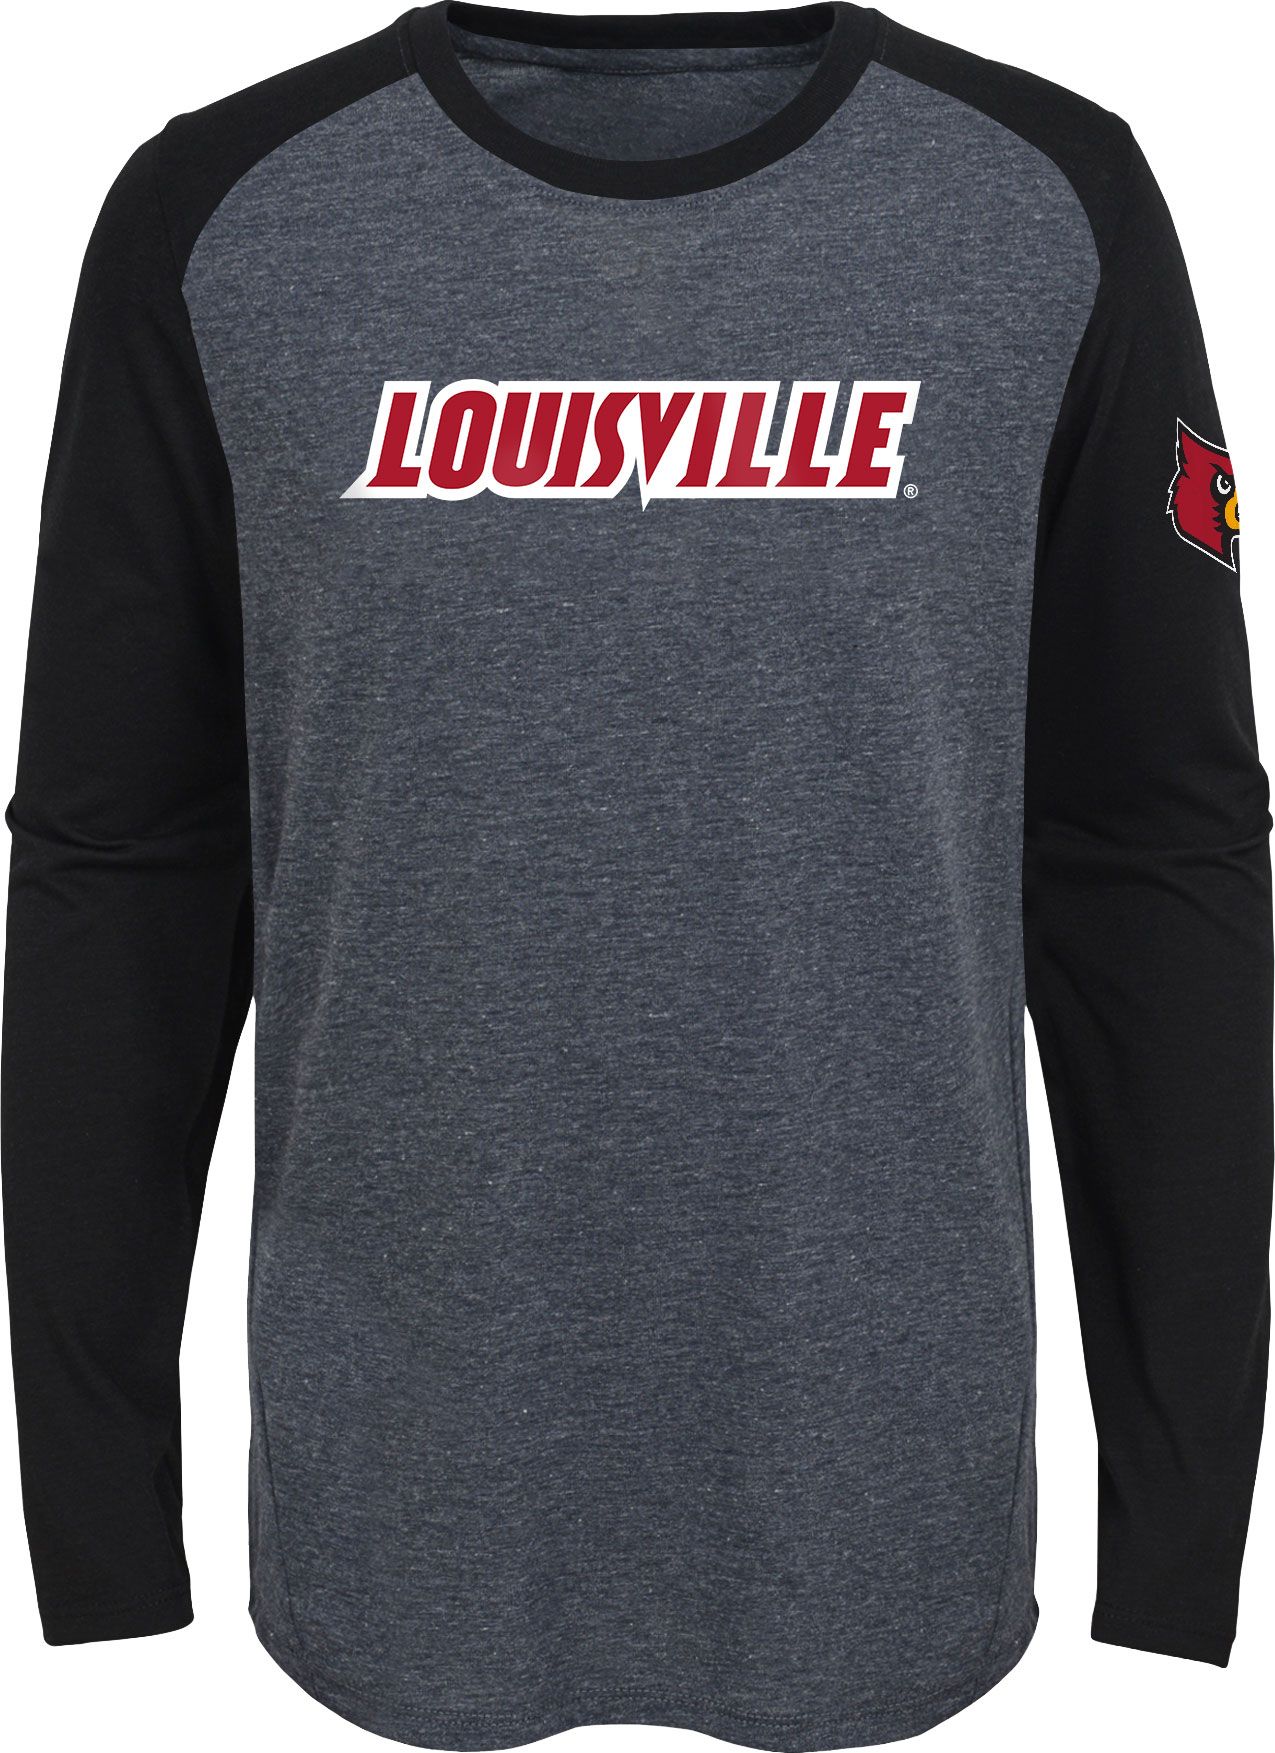 louisville cardinals youth apparel